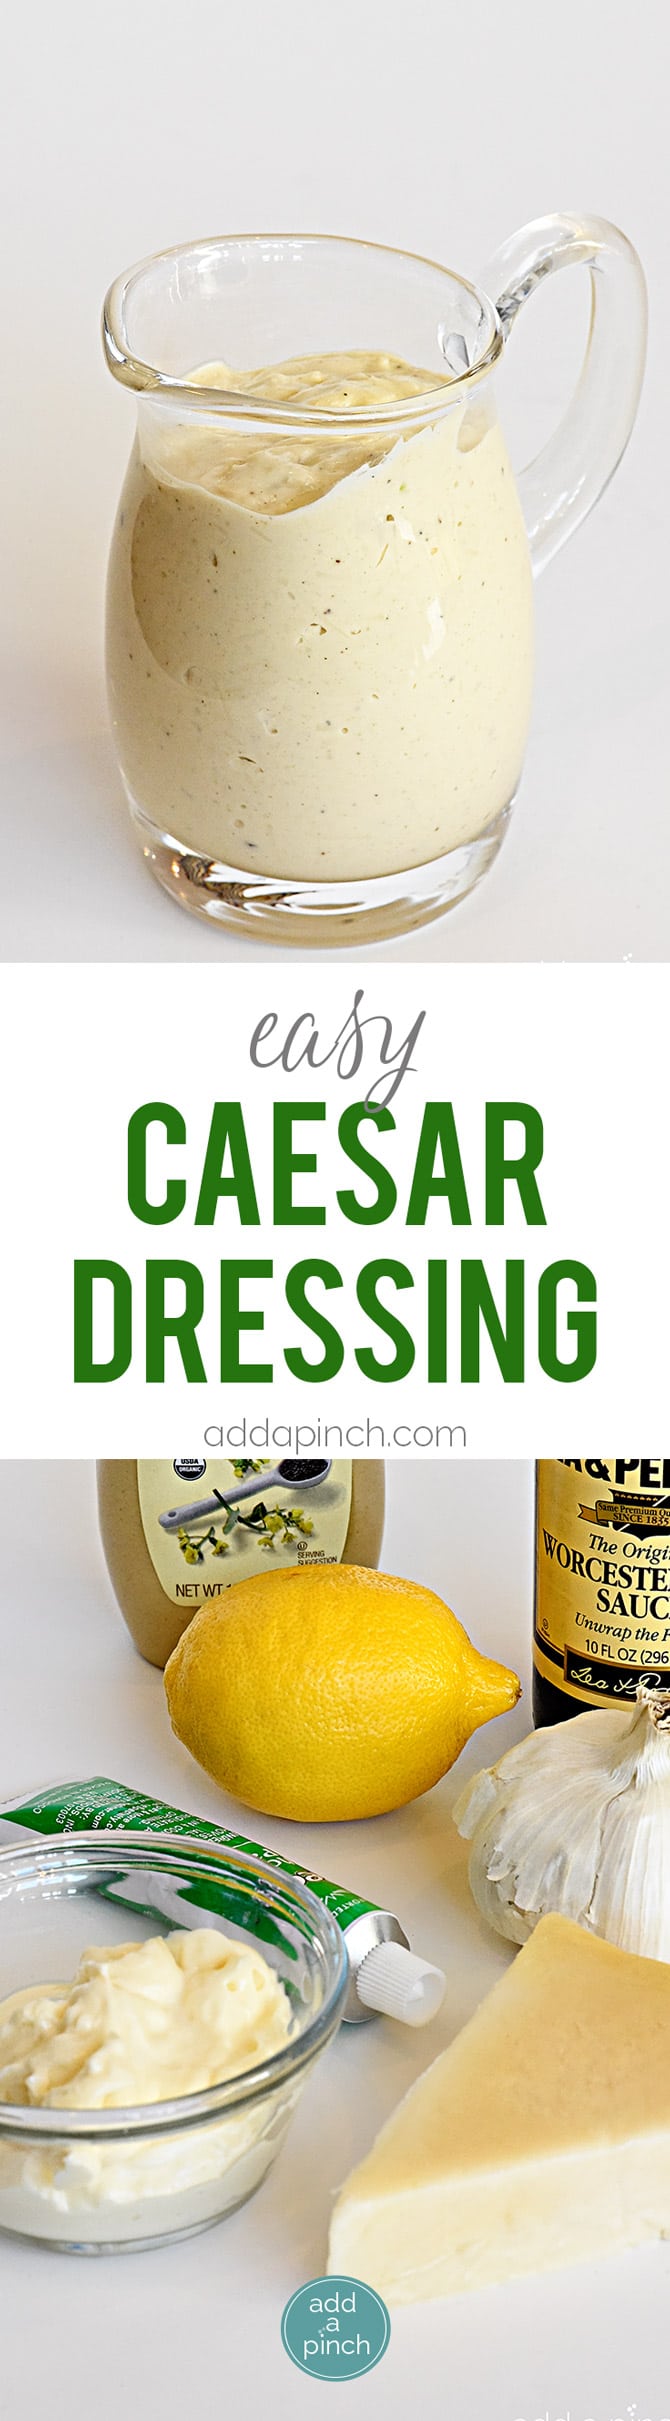 Easy Caesar Dressing is creamy and delicious! A restaurant-style caesar salad dressing made at home with just a few ingredients! // addapinch.com